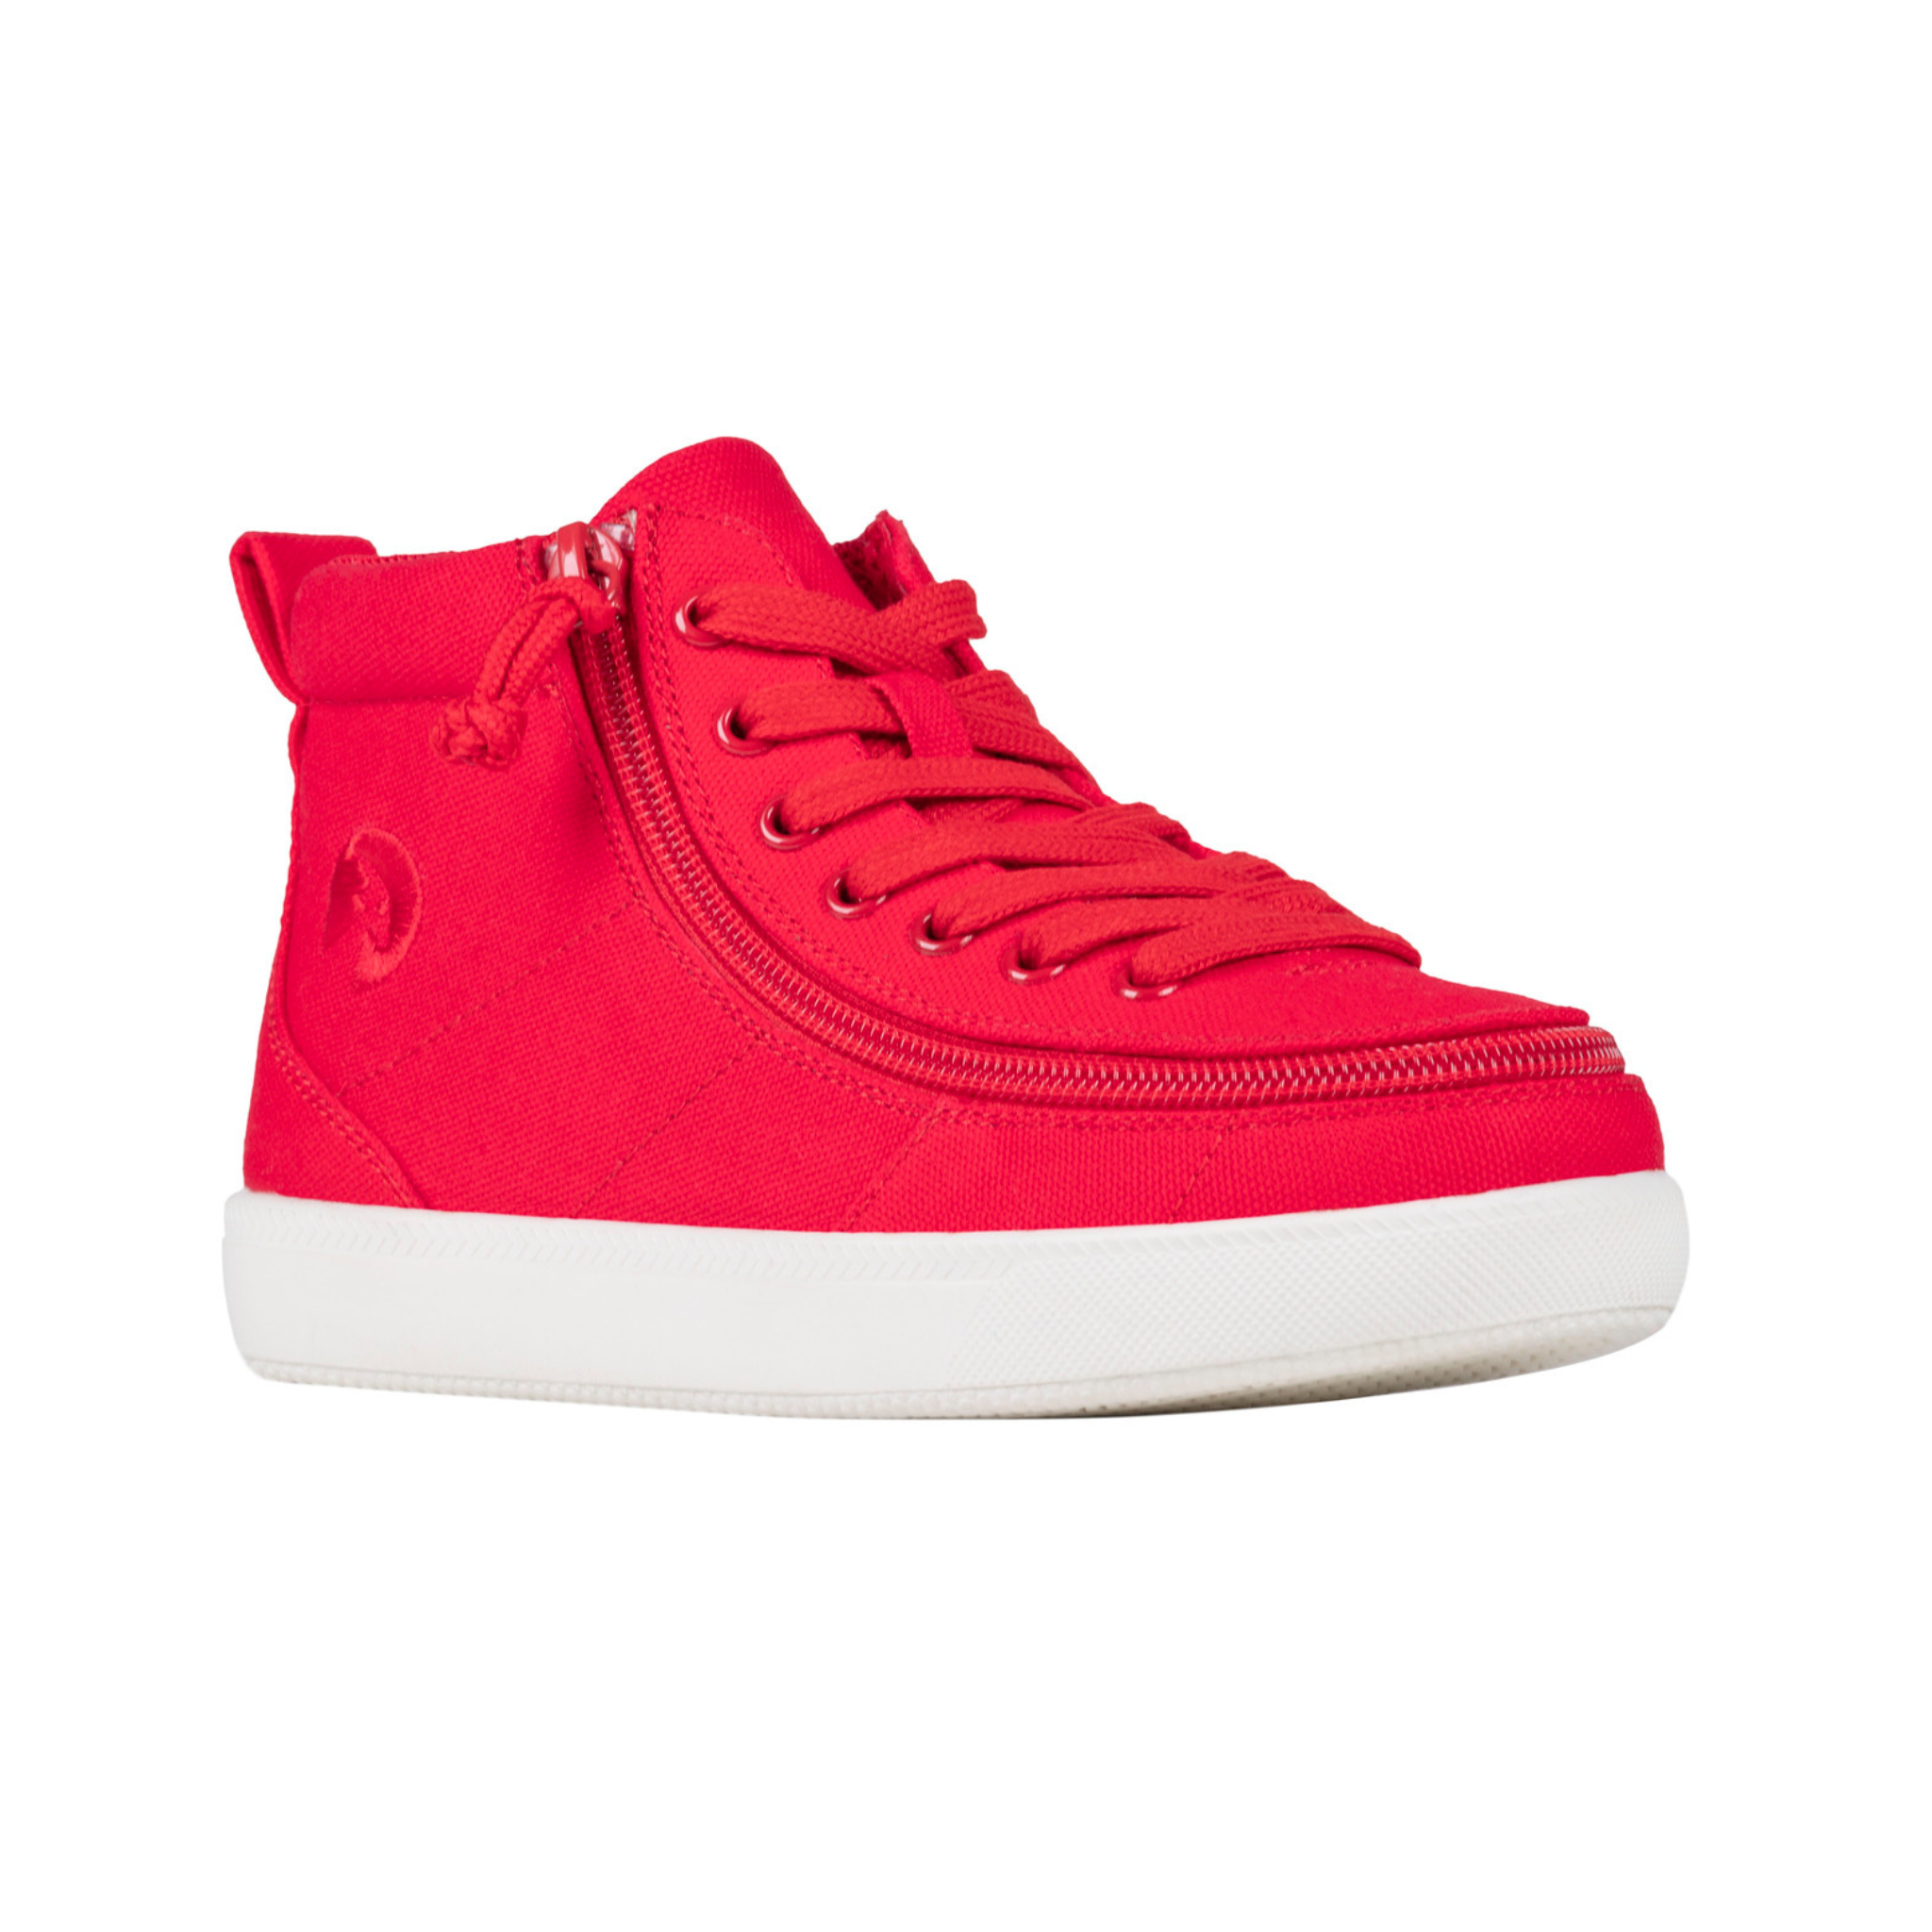 Billy Footwear (Kids) DR II Fit - High Top DR II RED Canvas Shoes